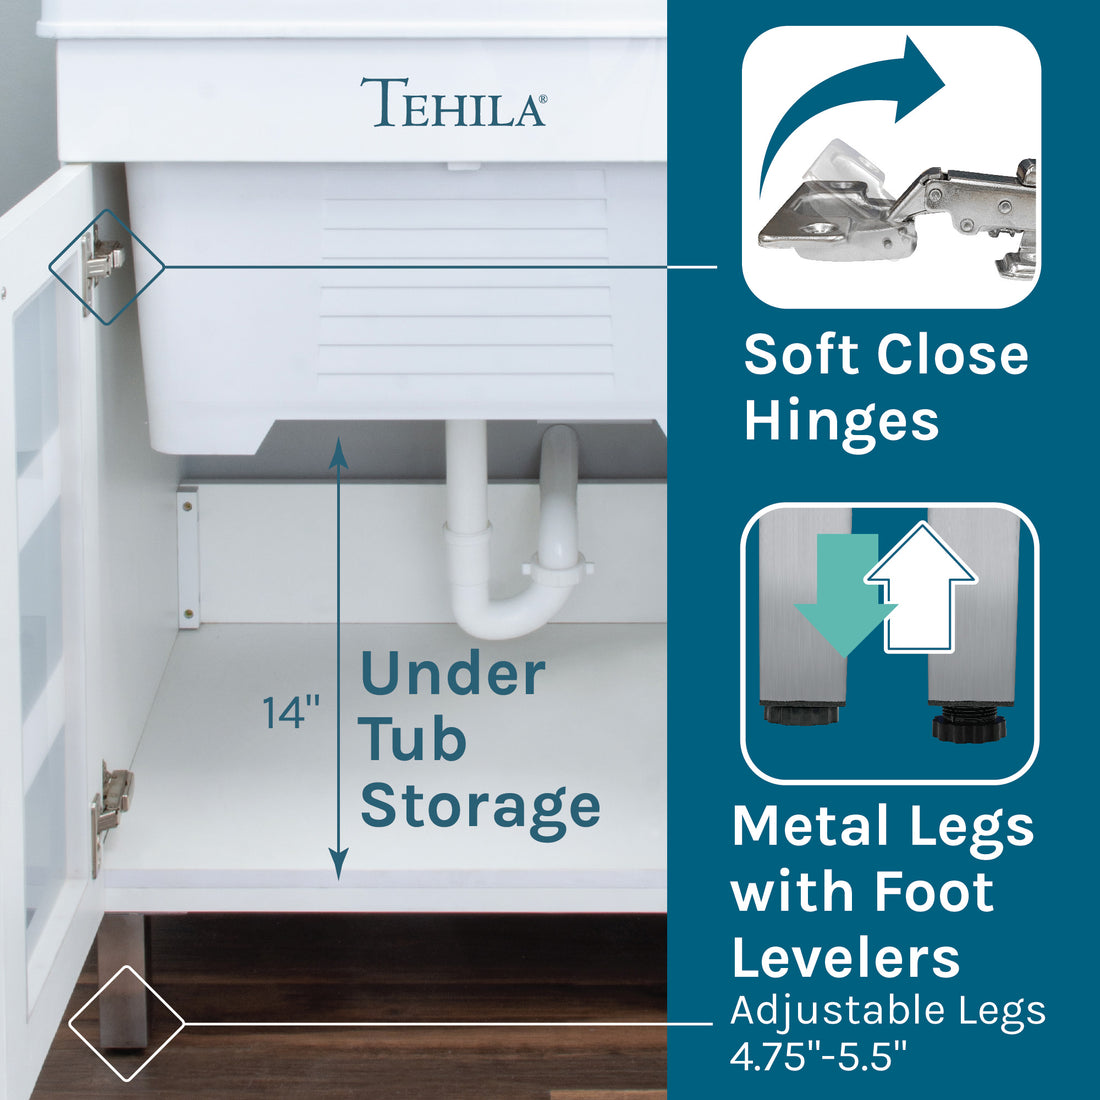 Tehila Under the Tub Storage with Soft Close Hinges and Metal Legs with Foot levelers.